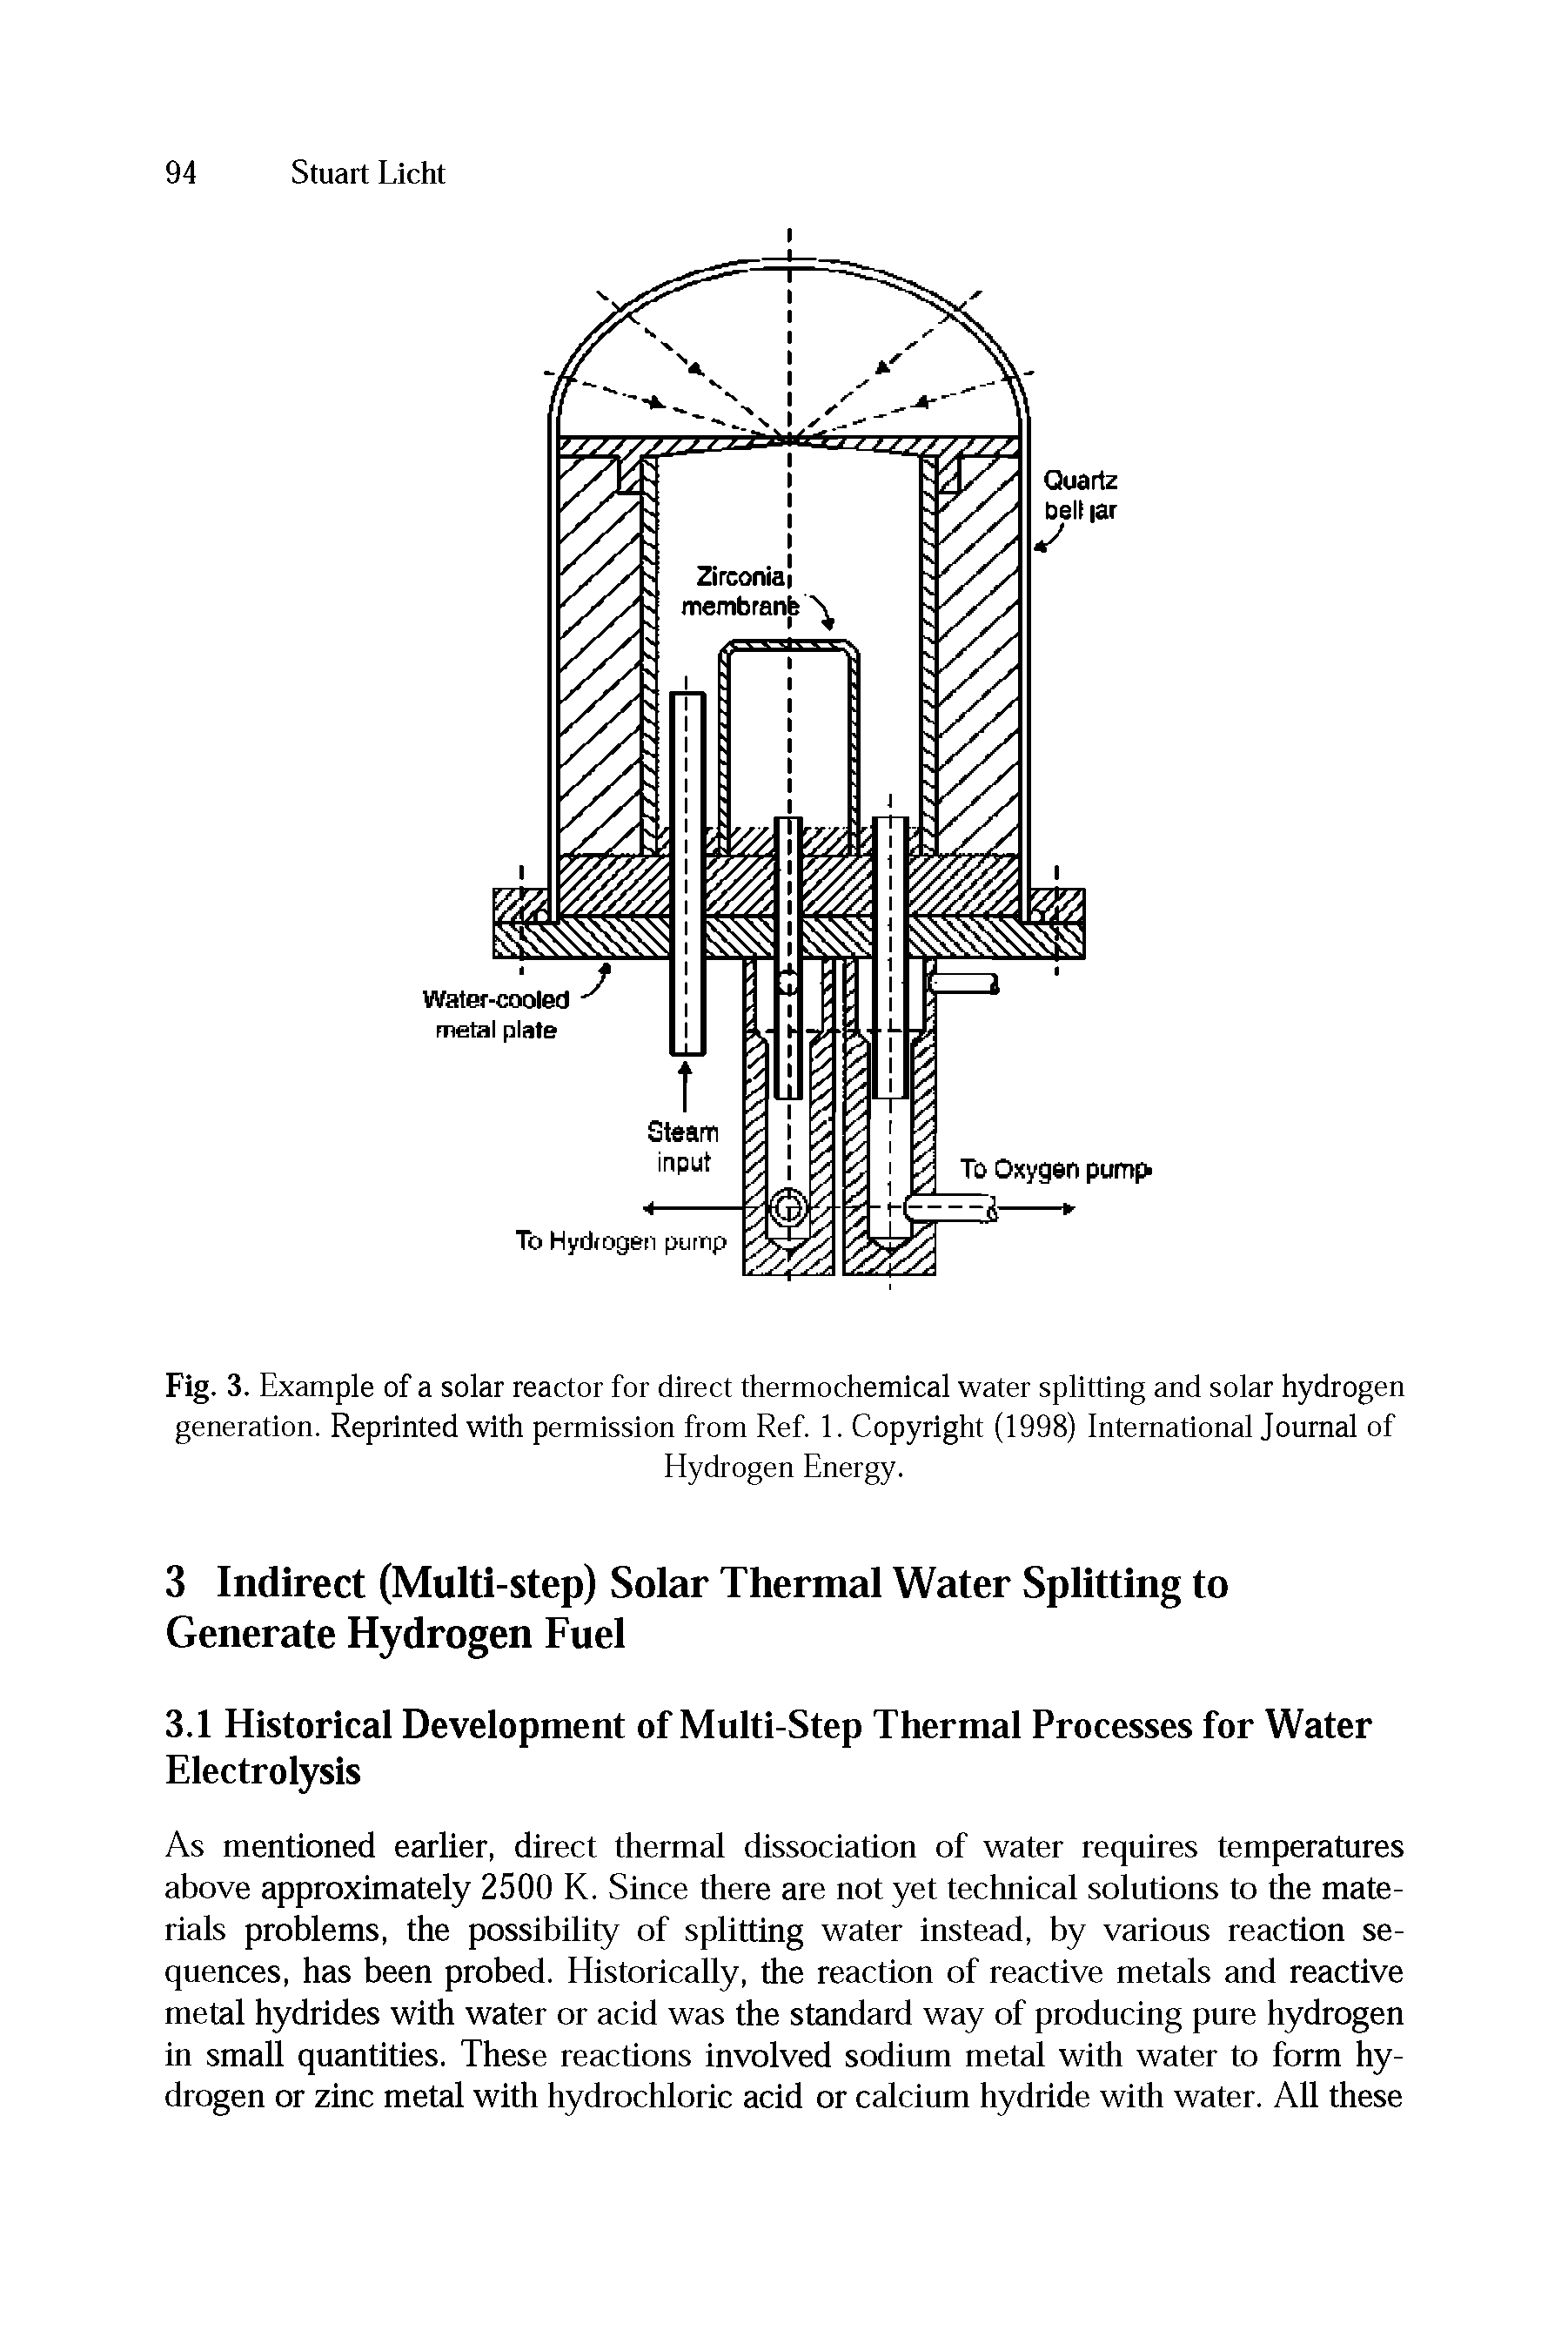 Fig. 3. Example of a solar reactor for direct thermochemical water splitting and solar hydrogen generation. Reprinted with permission from Ref. 1. Copyright (1998) International Journal of...